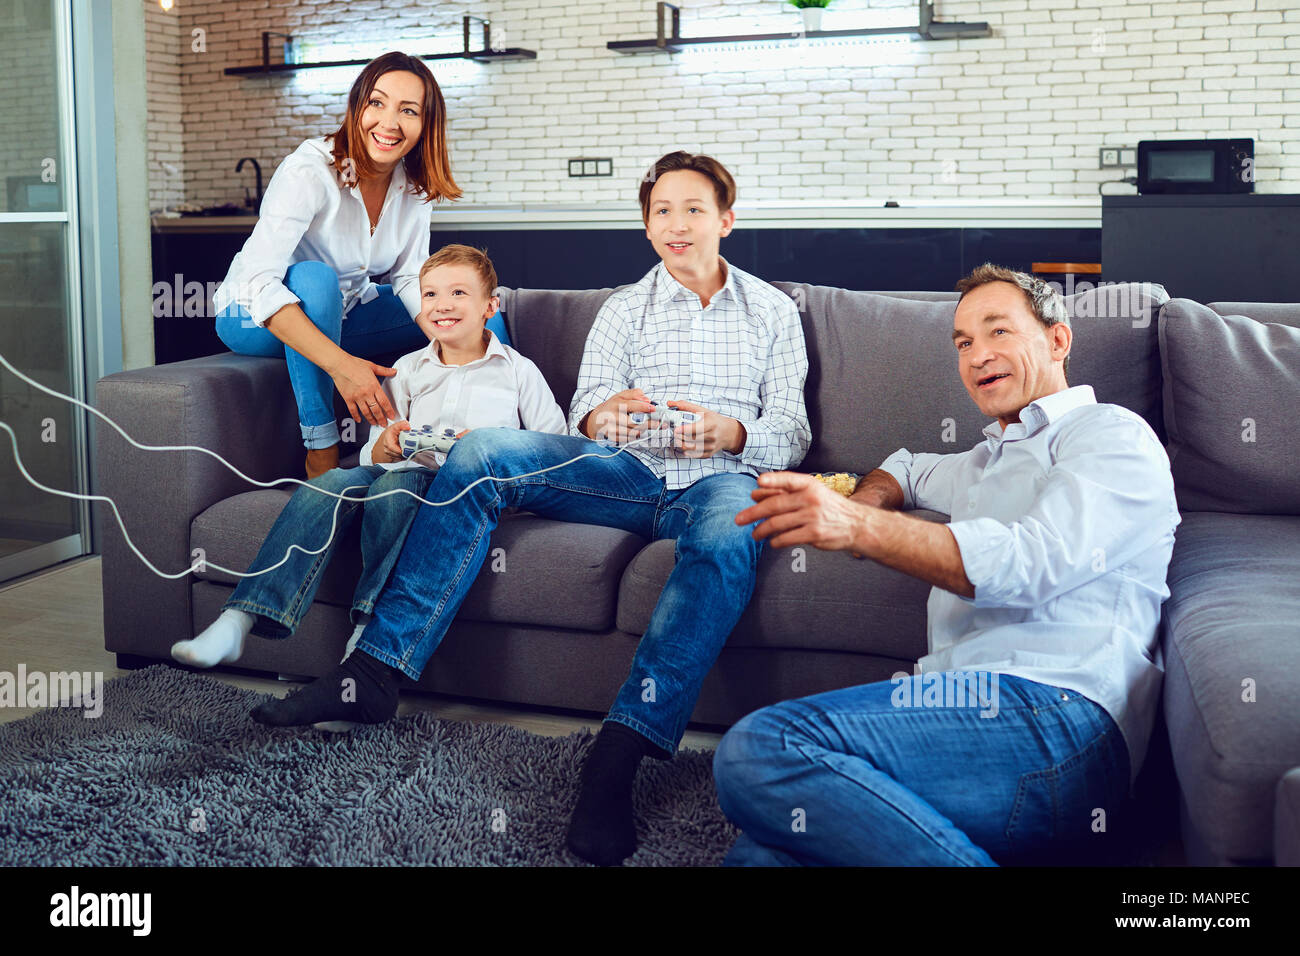 A cheerful family is playing video games while sitting on a sofa Stock Photo